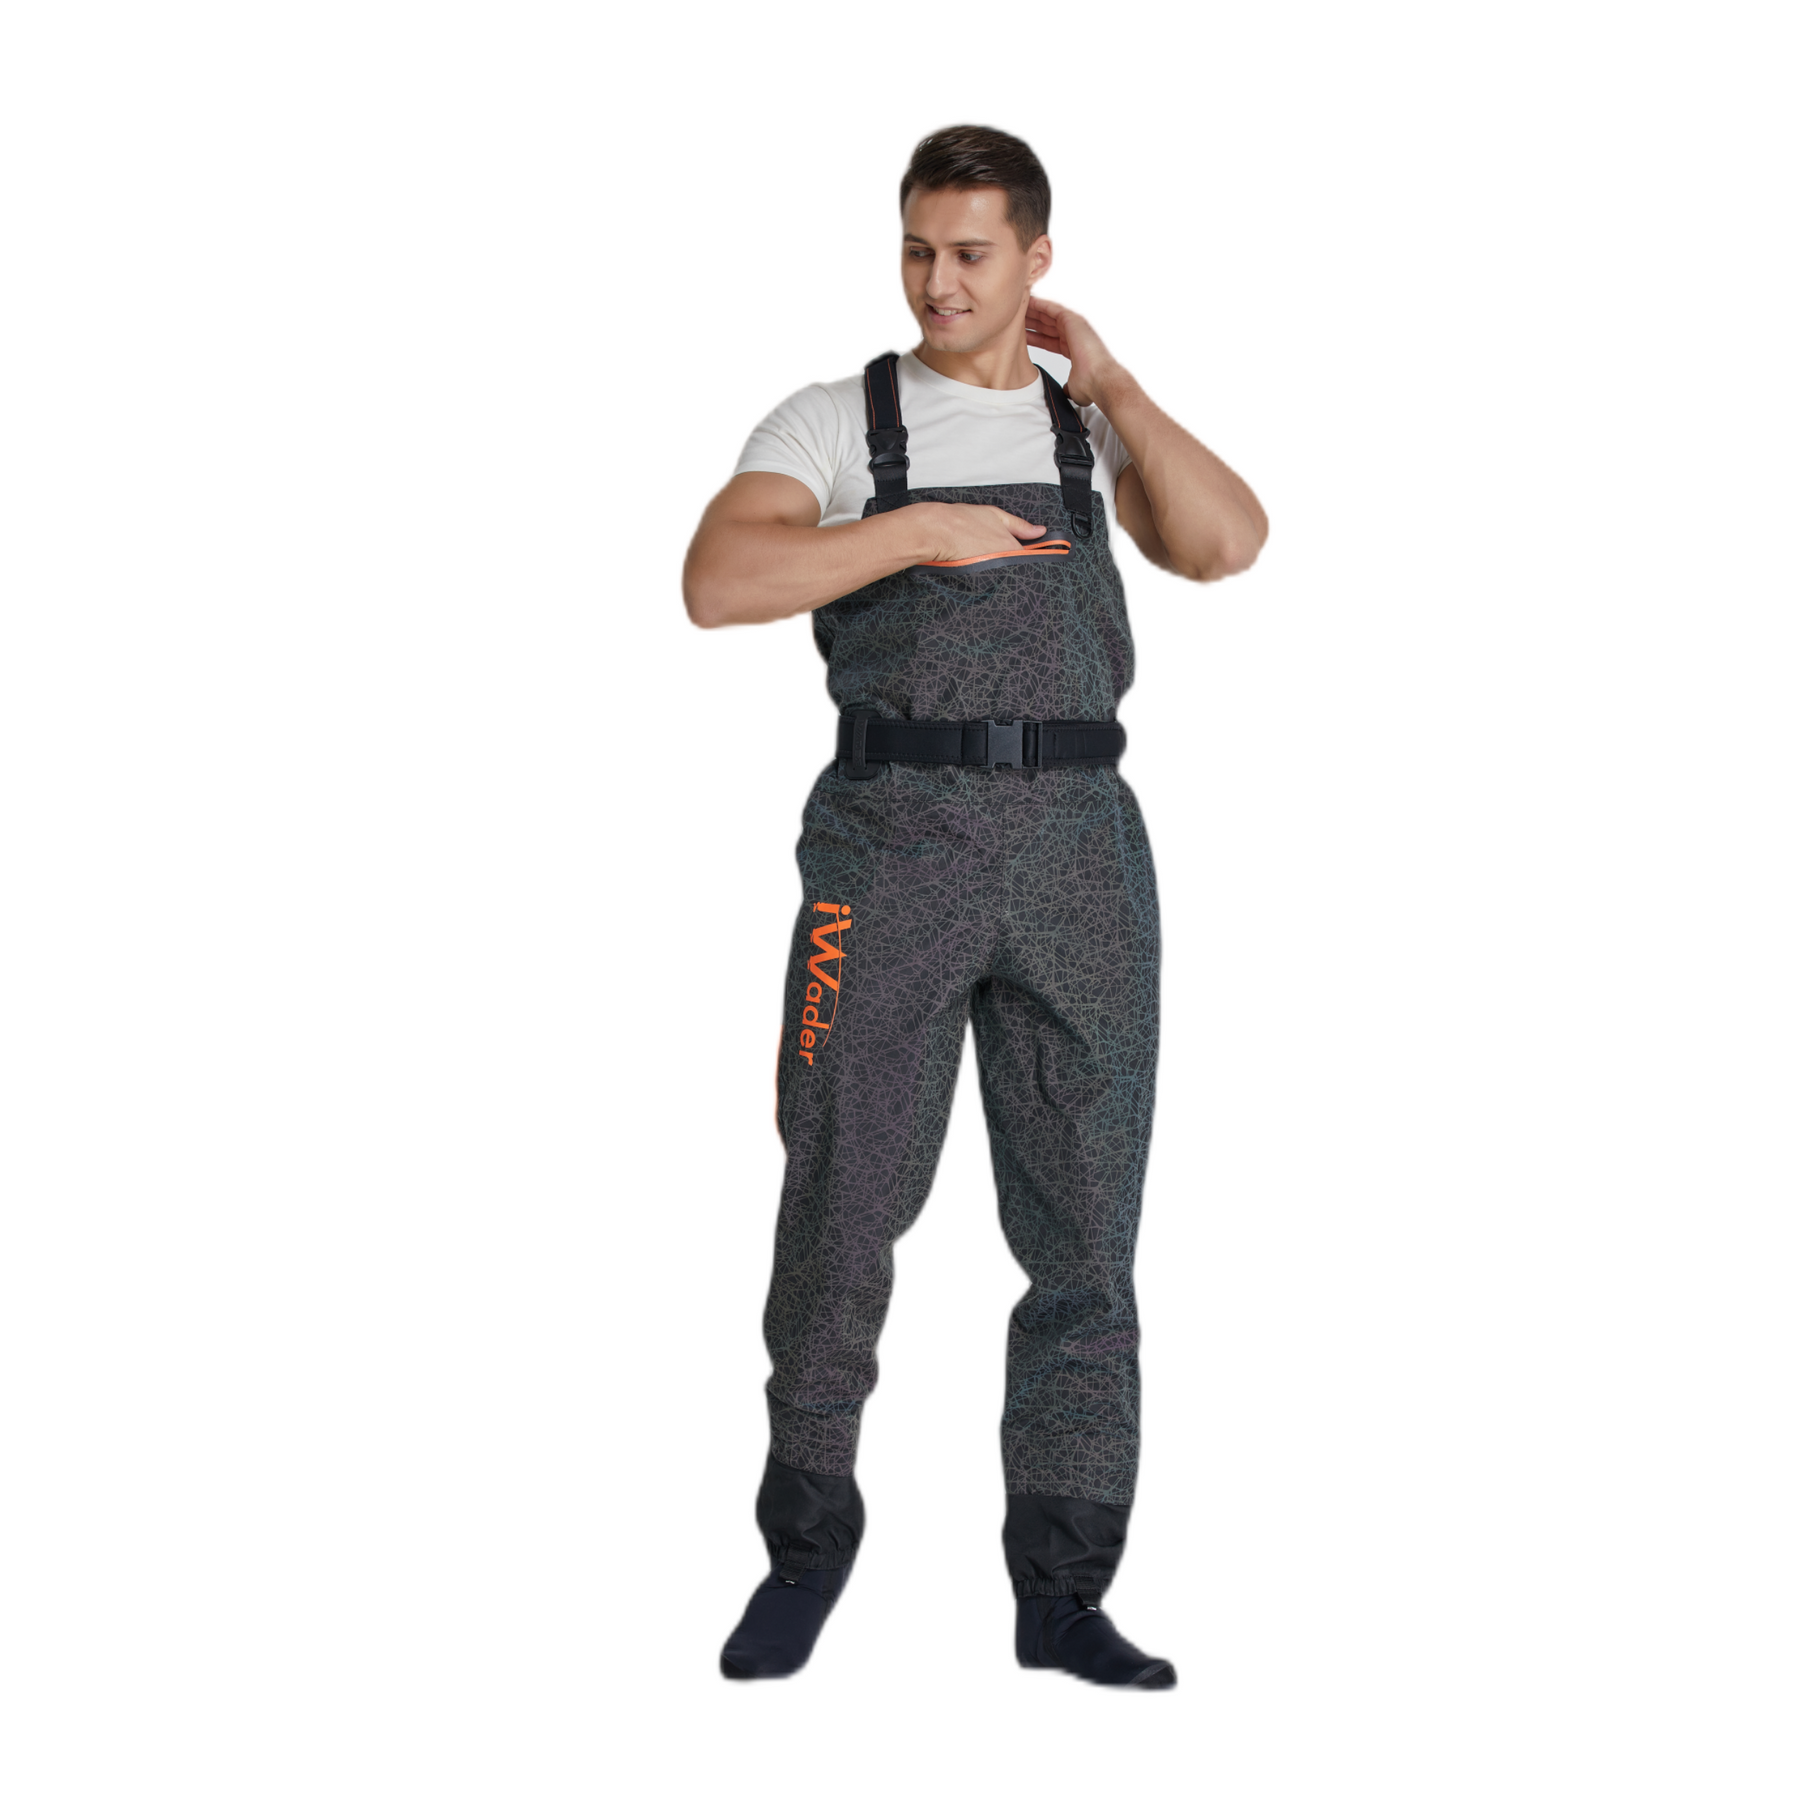 C7 Camo Breathable Waders-A night fishman's(hunting)Protective